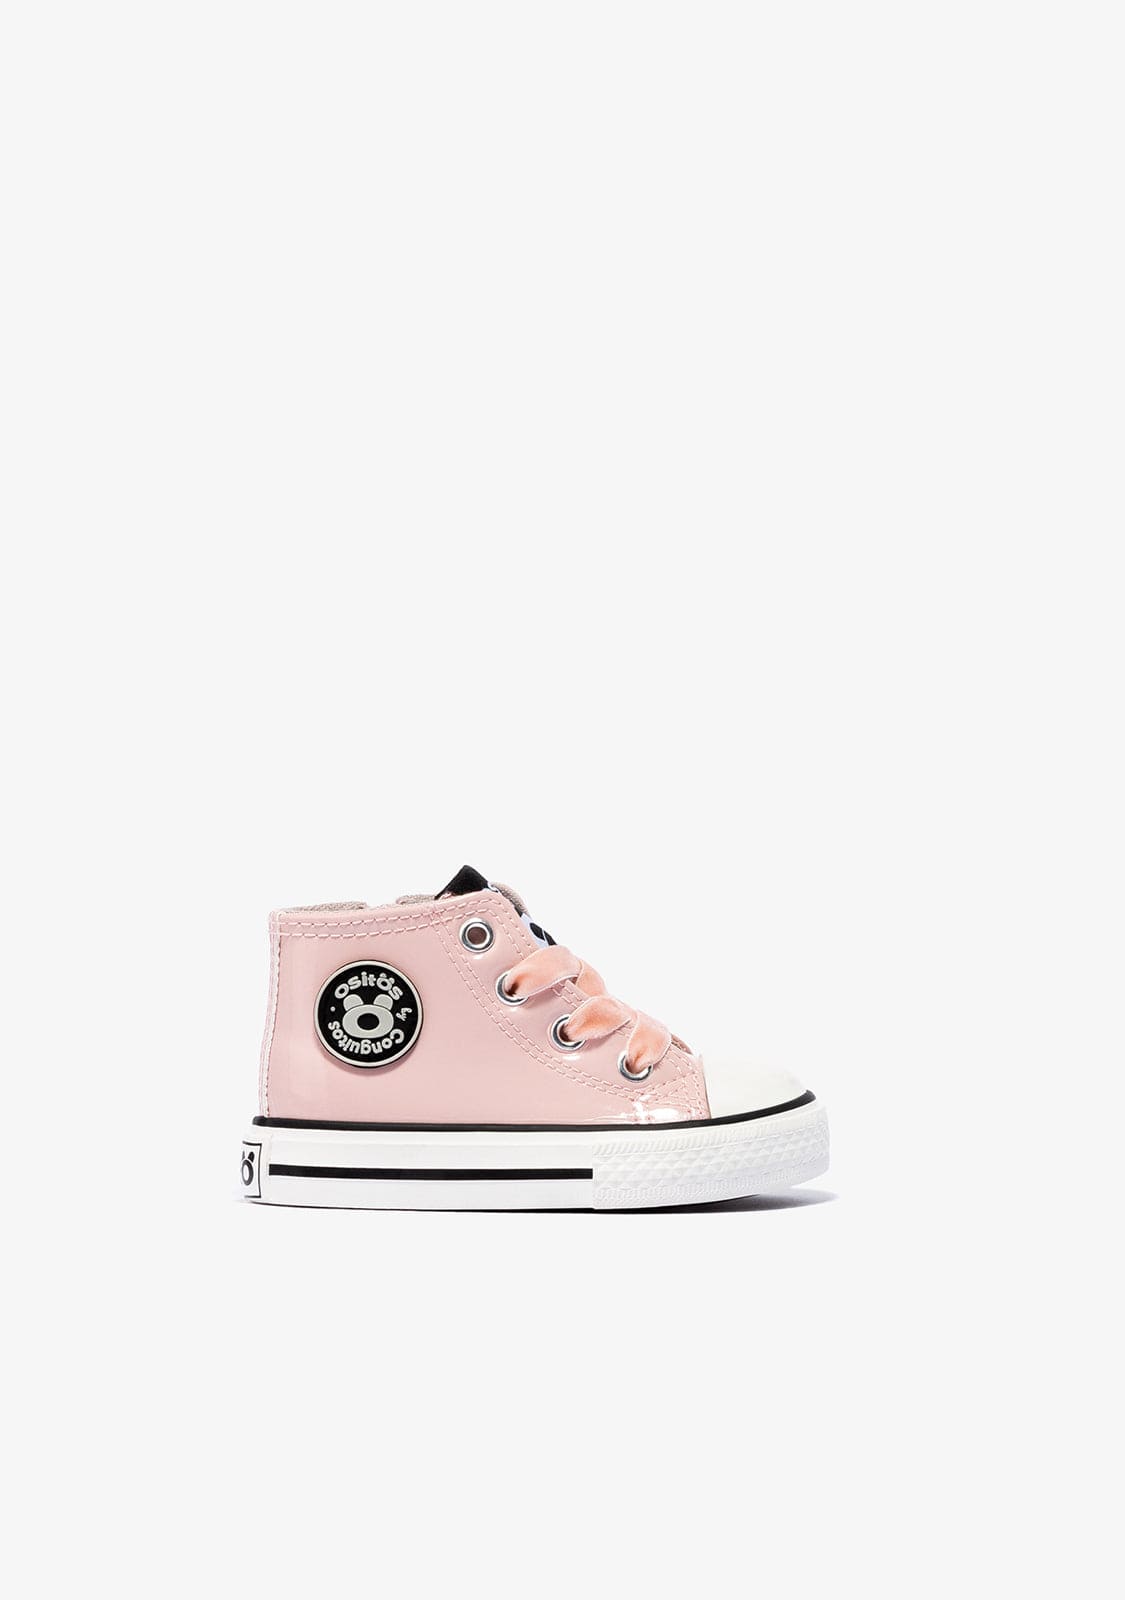 OSITO Shoes Baby's Pink Patent Leather Hi-Top Sneakers